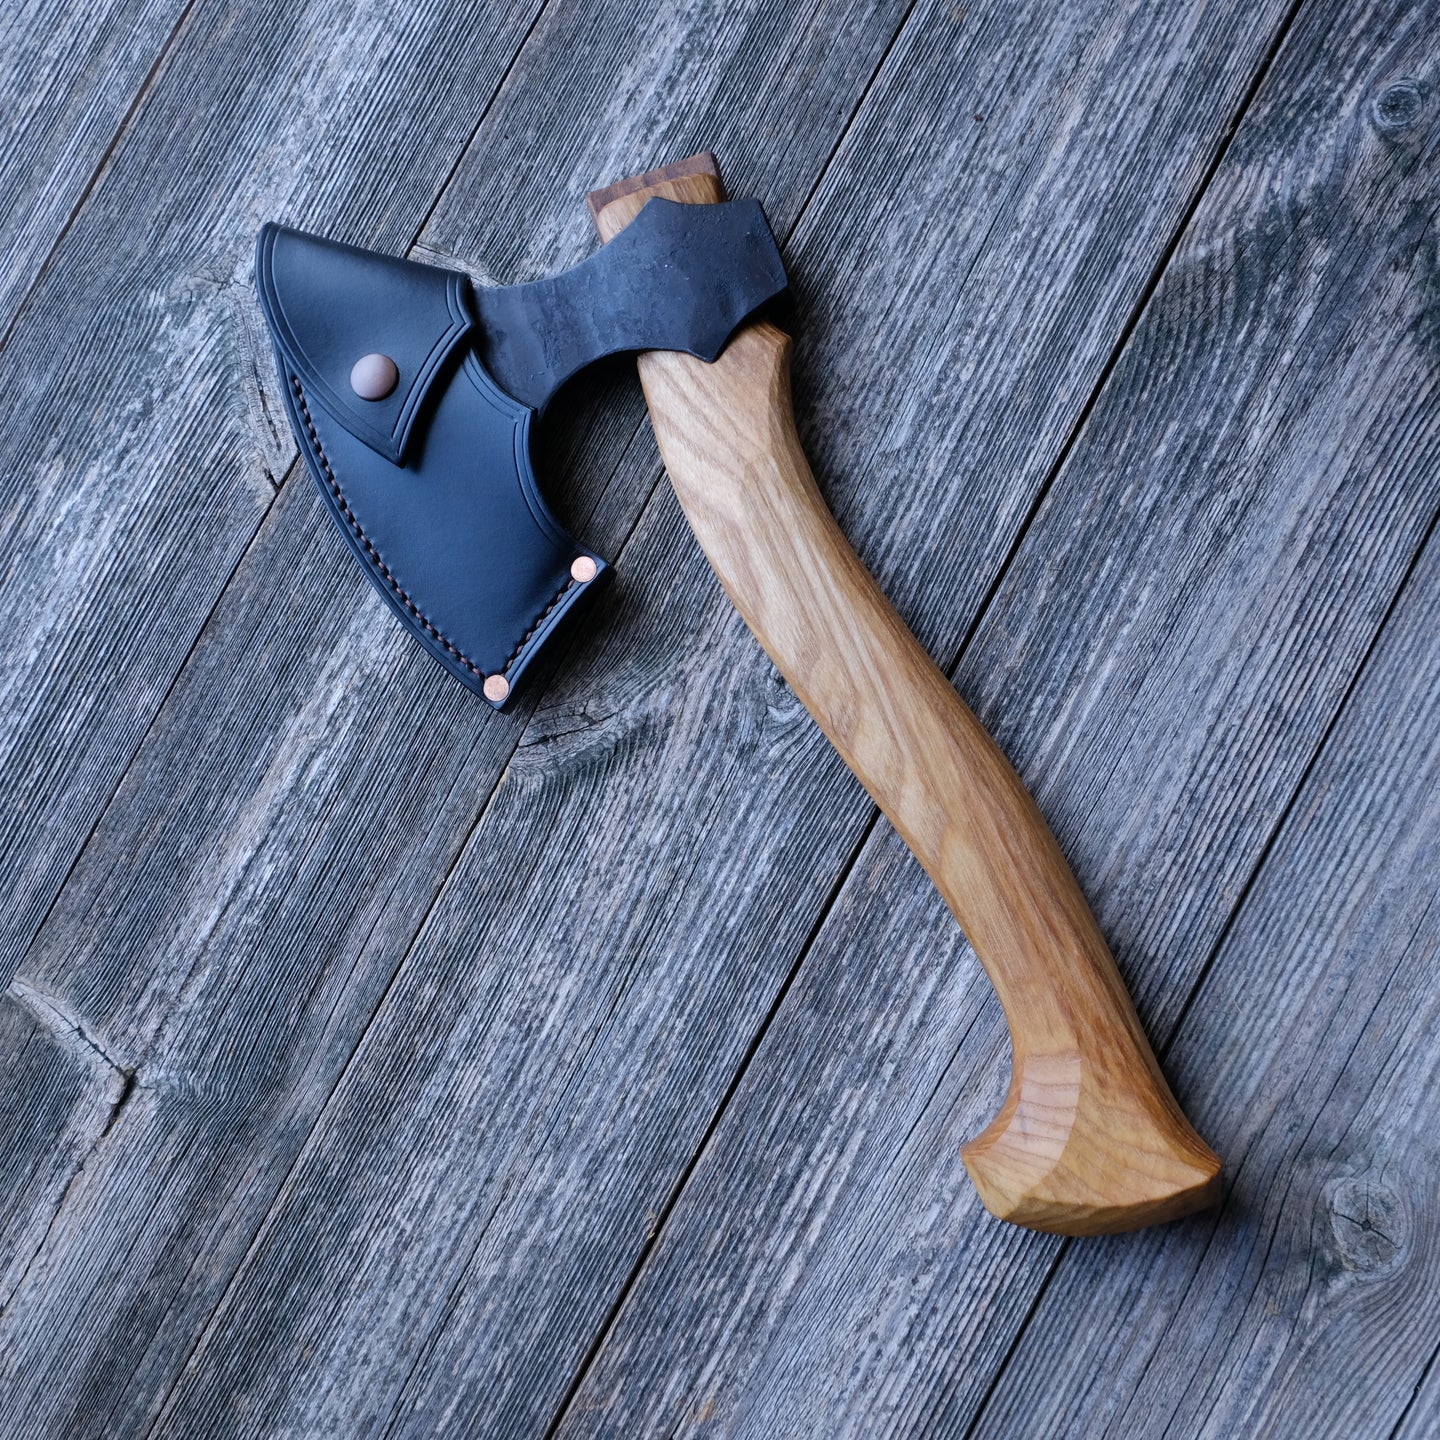 Carving Axe, Wood Carving Axe